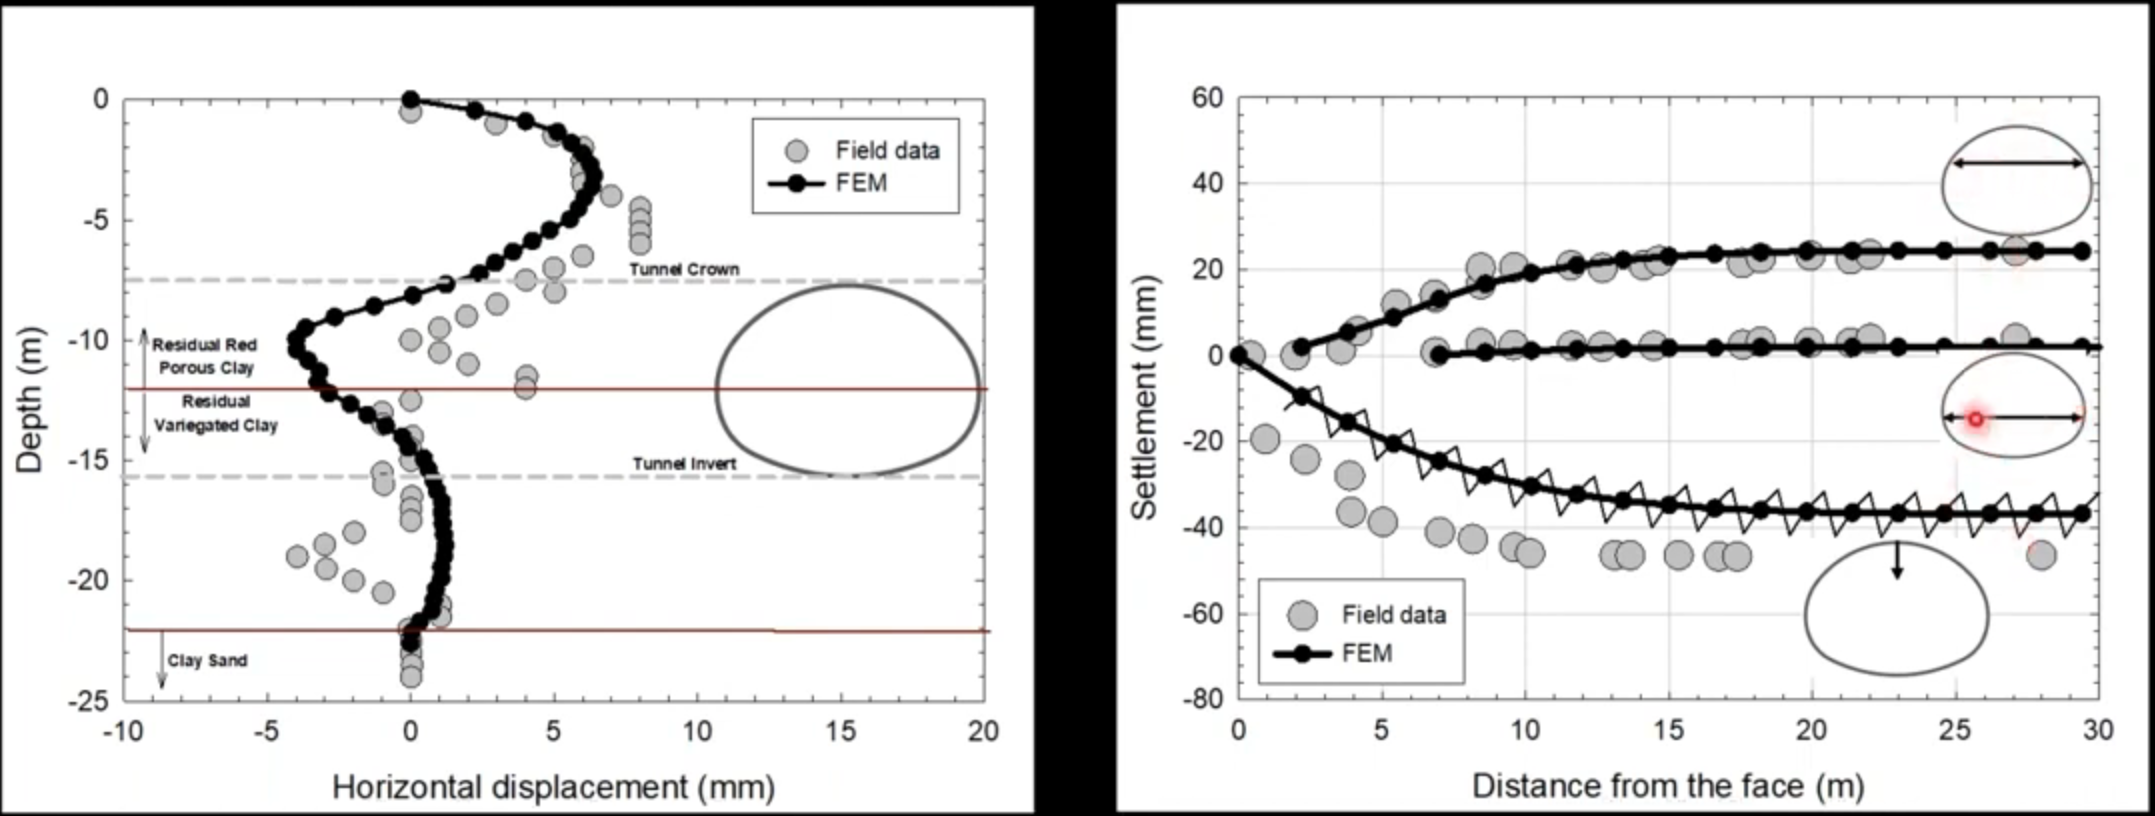 10. Comparison of Model Results with Instrumentation Data